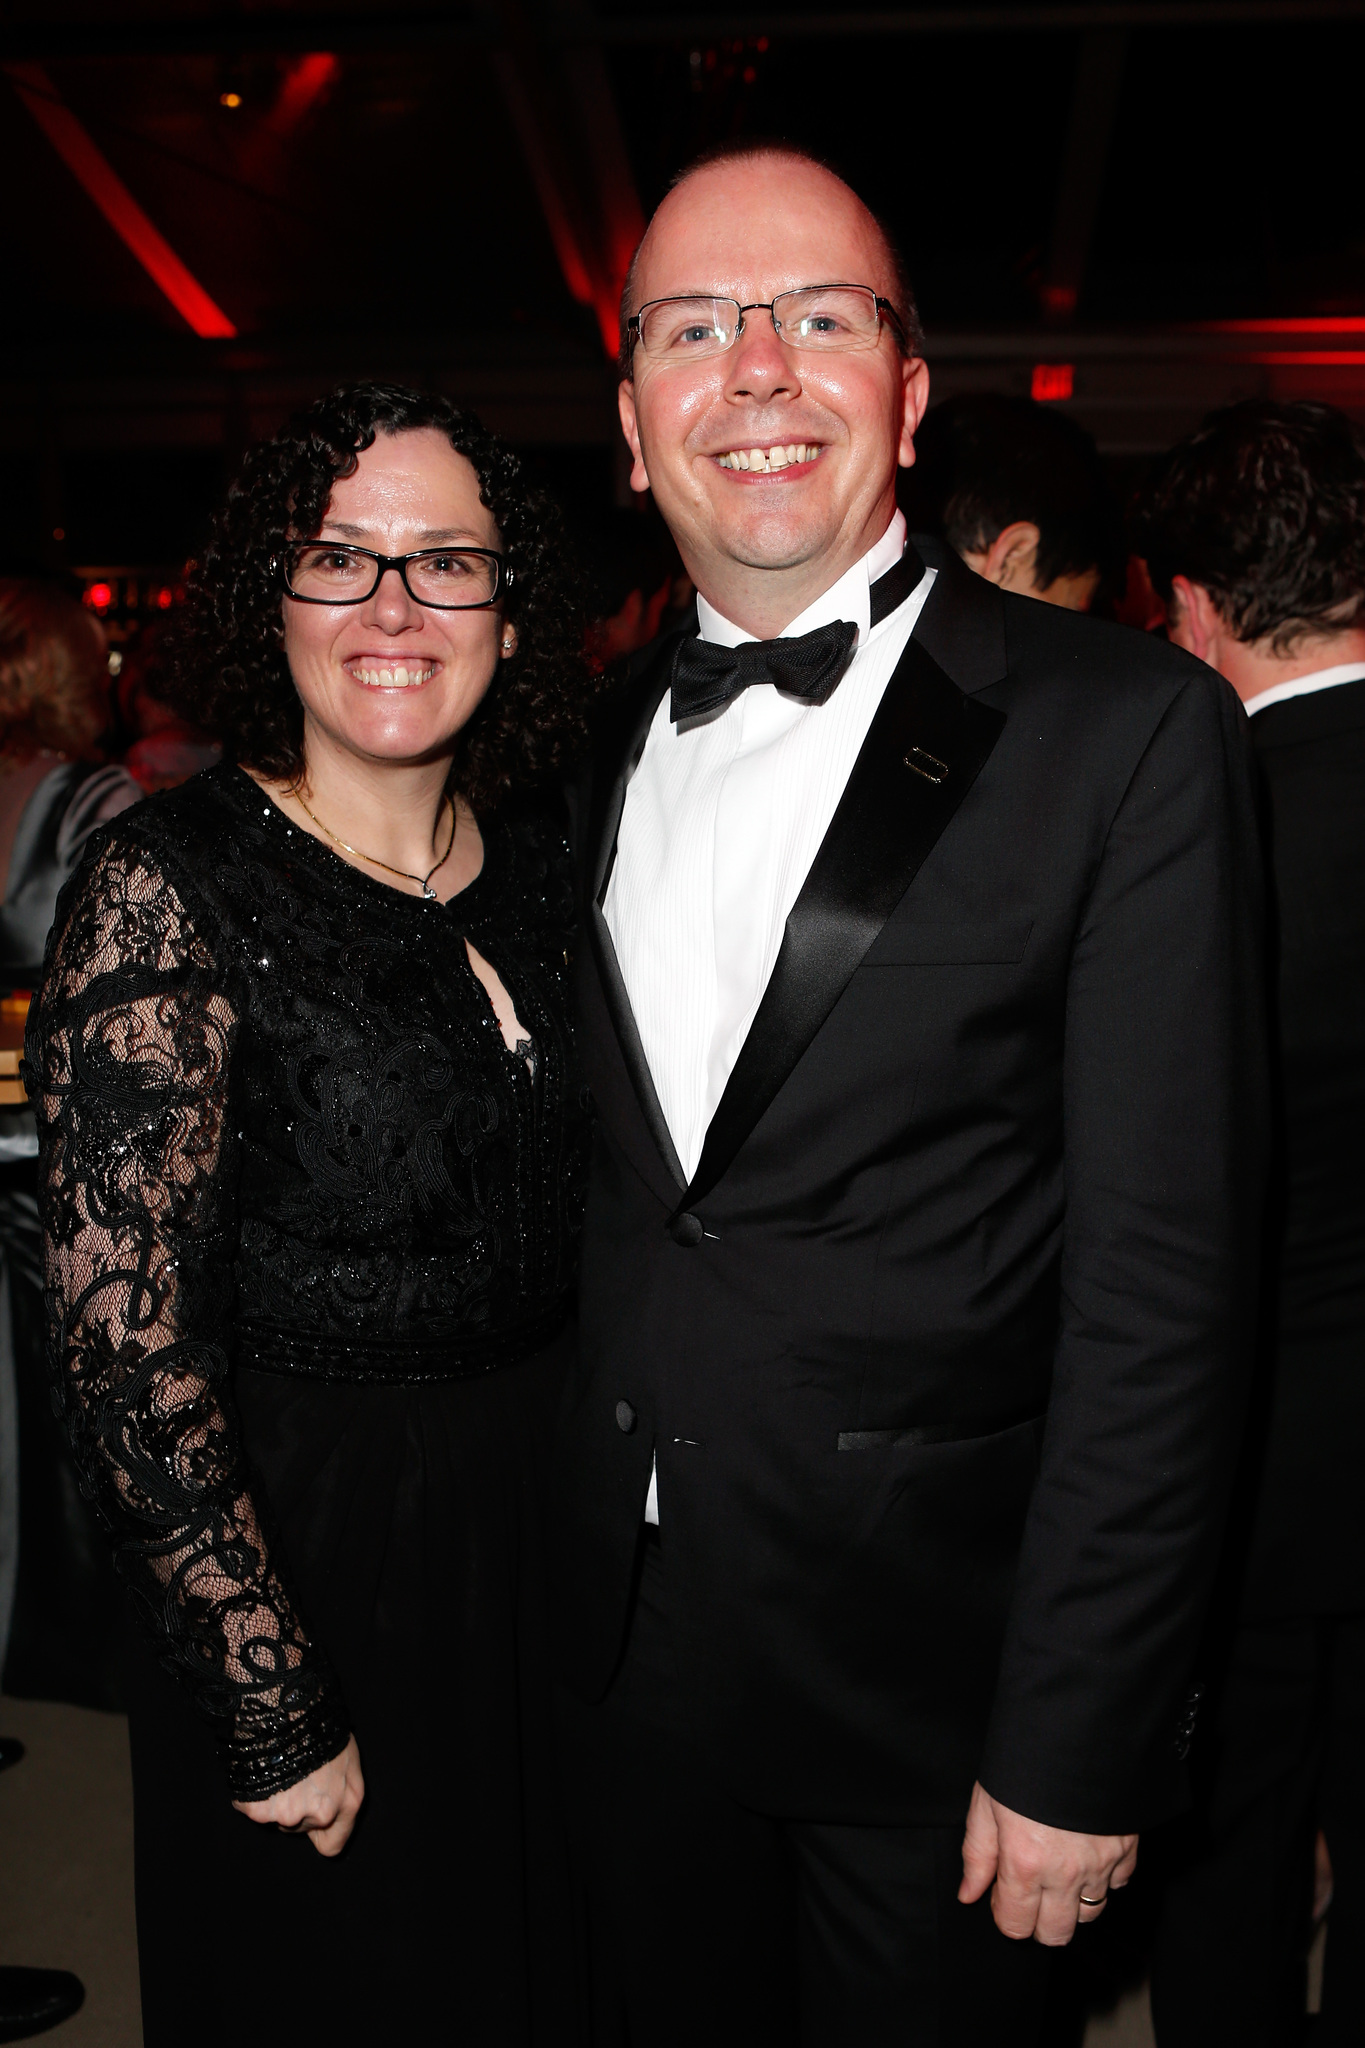 Founder and CEO of The Internet Movie Database Col Needham (R) and Karen Needham attend the 2014 Vanity Fair Oscar Party Hosted By Graydon Carter on March 2, 2014 in West Hollywood, California.